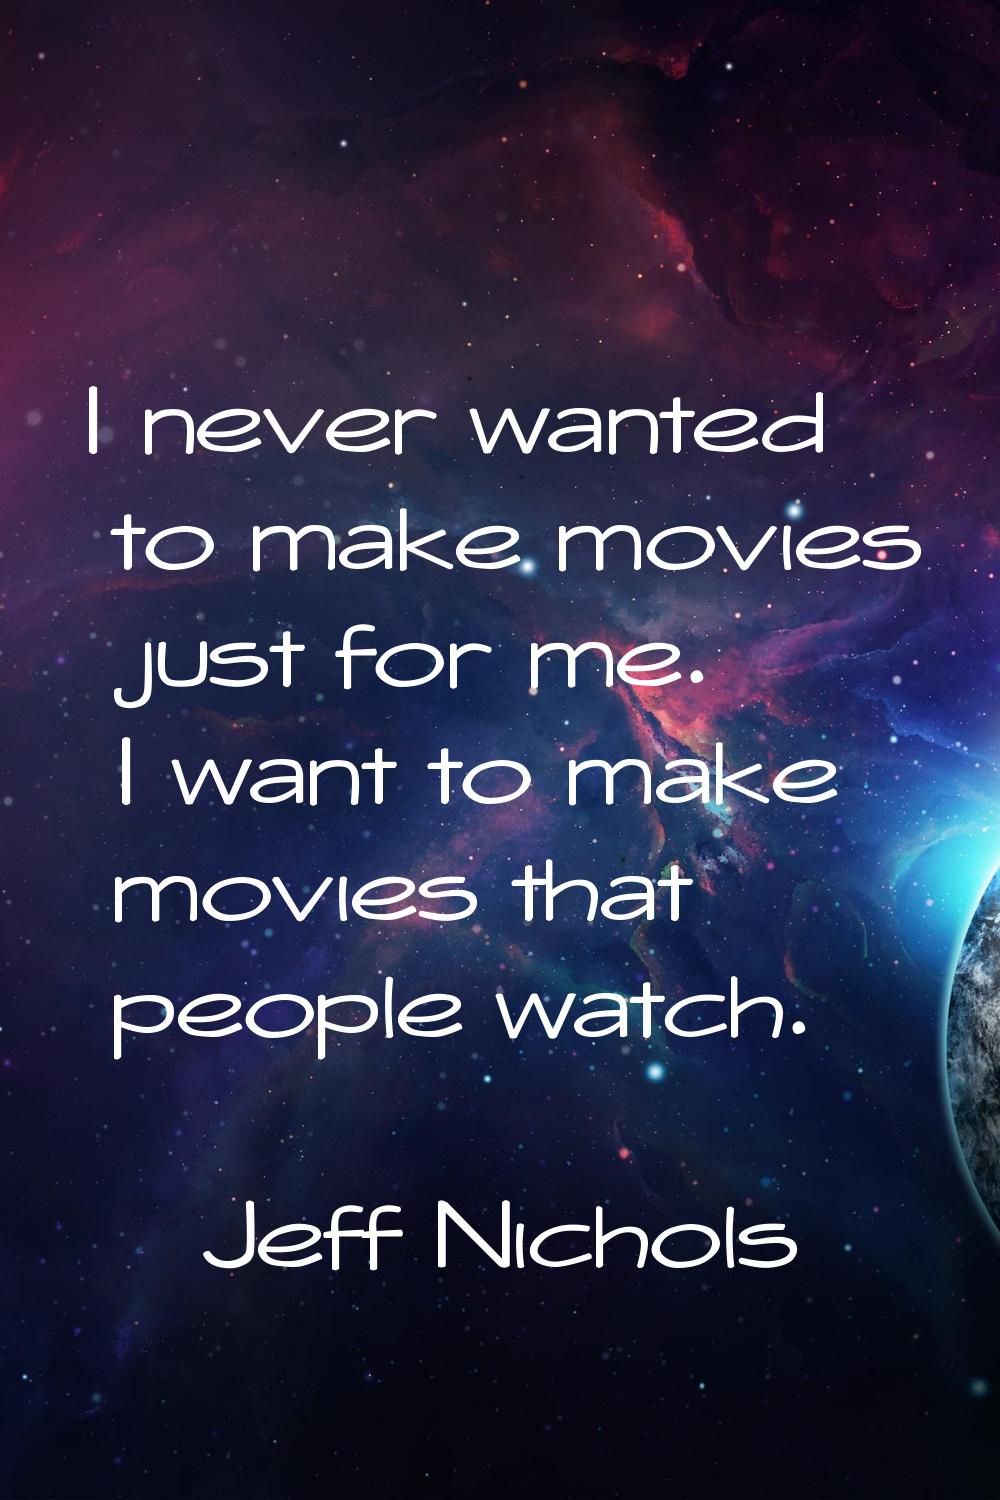 I never wanted to make movies just for me. I want to make movies that people watch.